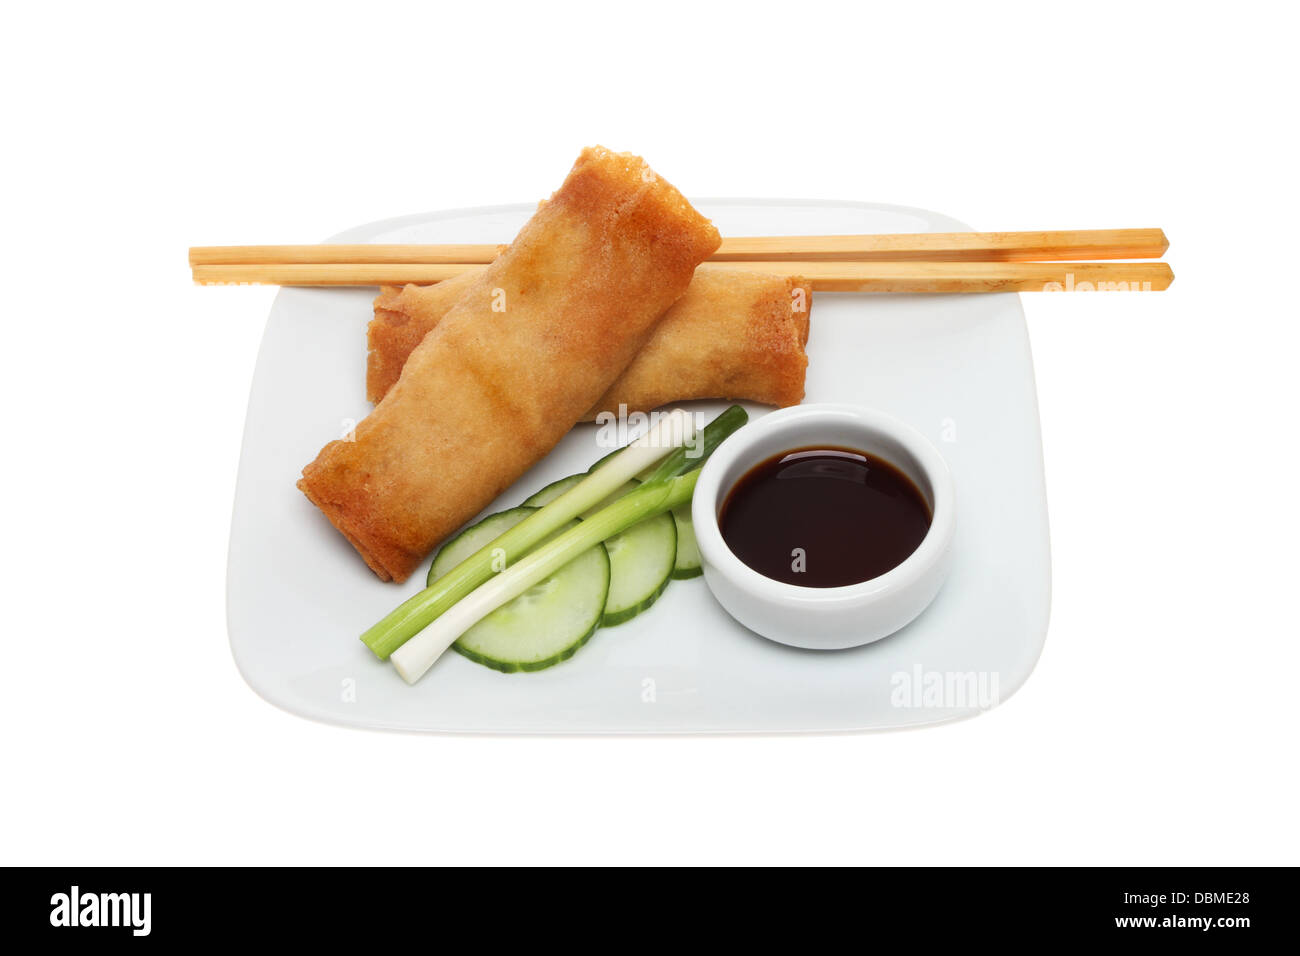 Pancake rolls, salad, soy sauce and chopsticks on a plate isolated against white Stock Photo